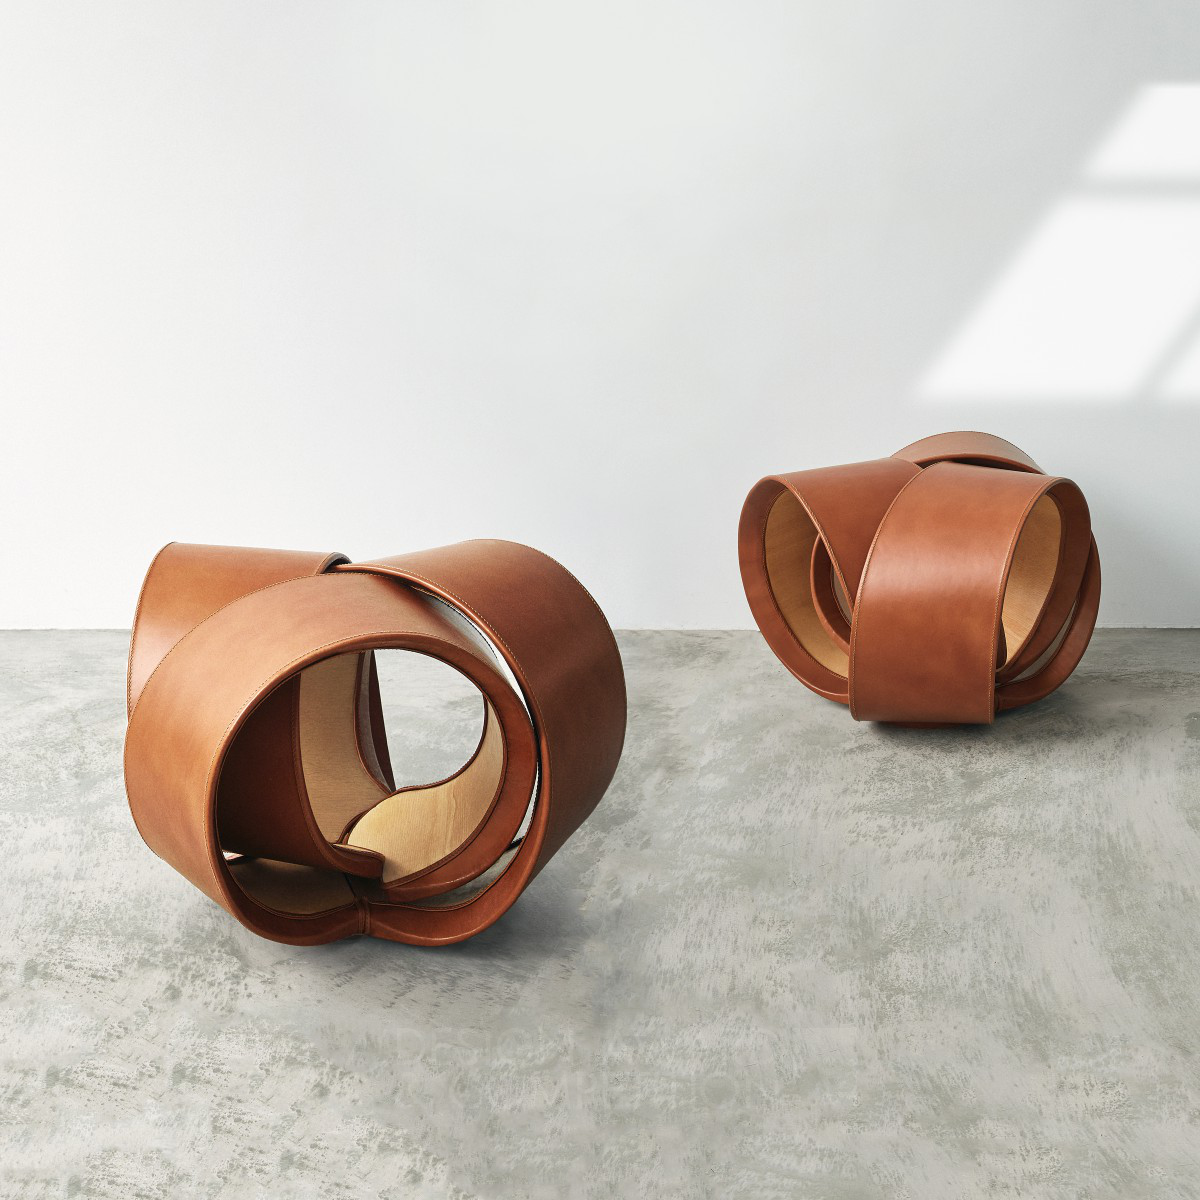 ChungSheng Chen wins Golden at the prestigious A' Furniture Design Award with O3Connect Stool.